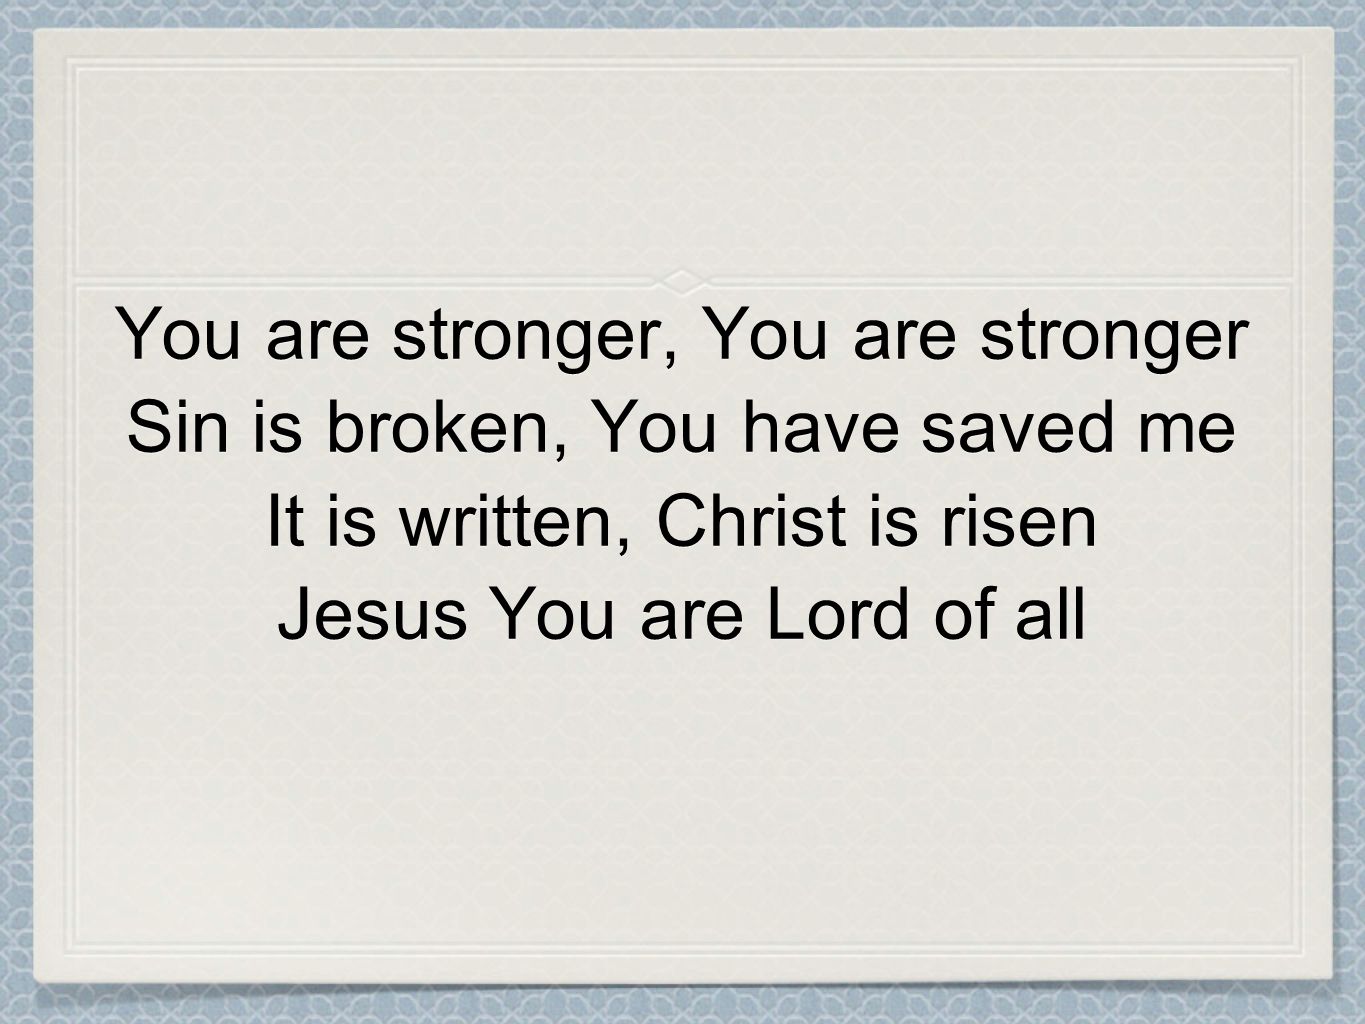 You are stronger, You are stronger Sin is broken, You have saved me It is written, Christ is risen Jesus You are Lord of all